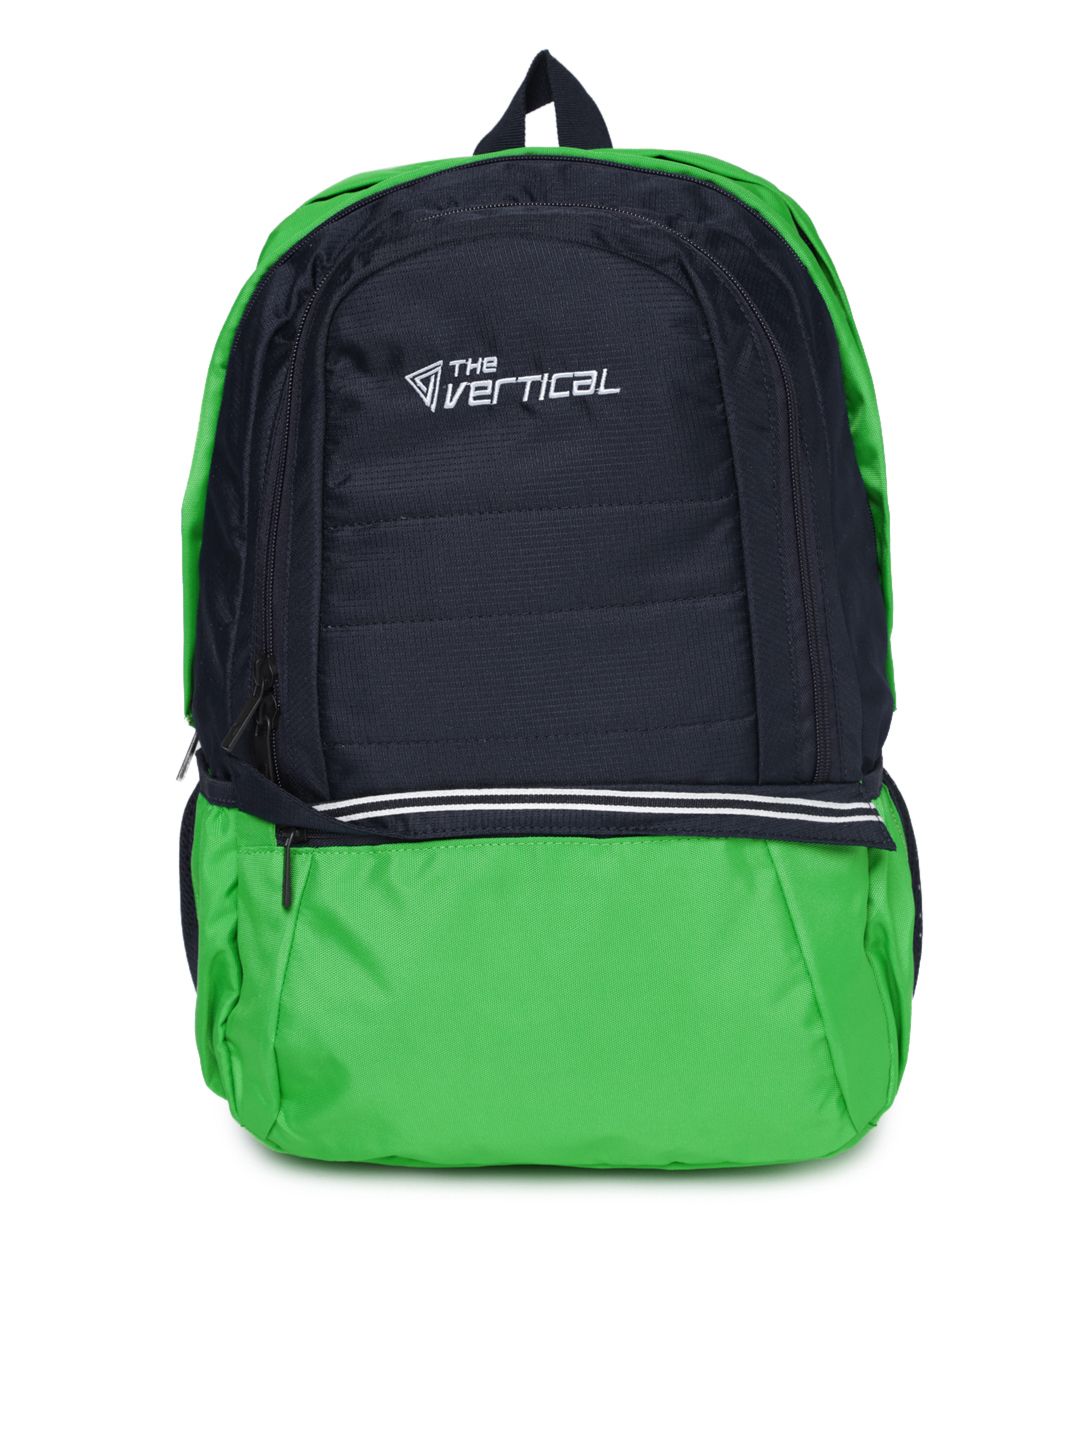 THe VerTicaL Unisex Navy & Green Laptop Backpack Price in India